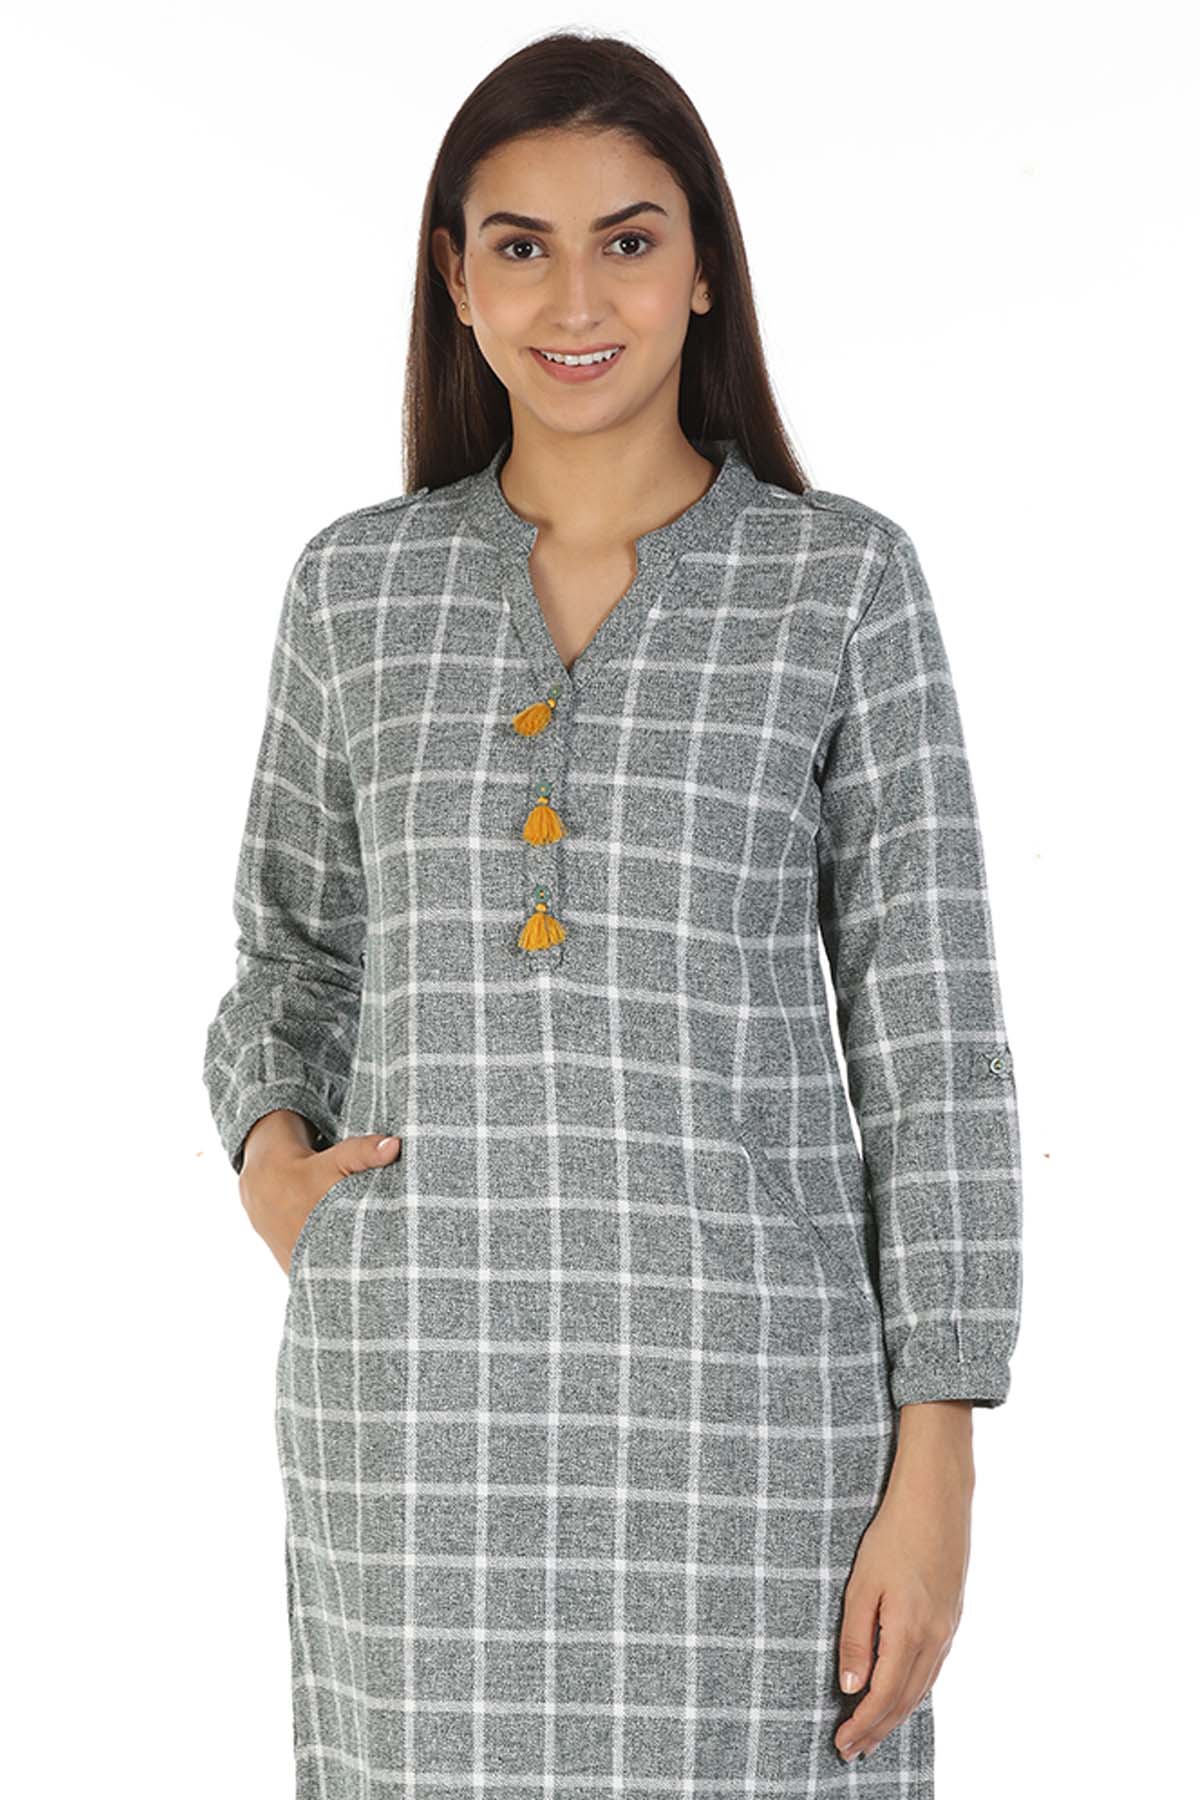 winter wear woolen kurtis for women 34th sleeve round neck woolen kurti  at Best Price  299 with many options Only in India at MartAvenuecom   Mart Avenue  MartAvenue